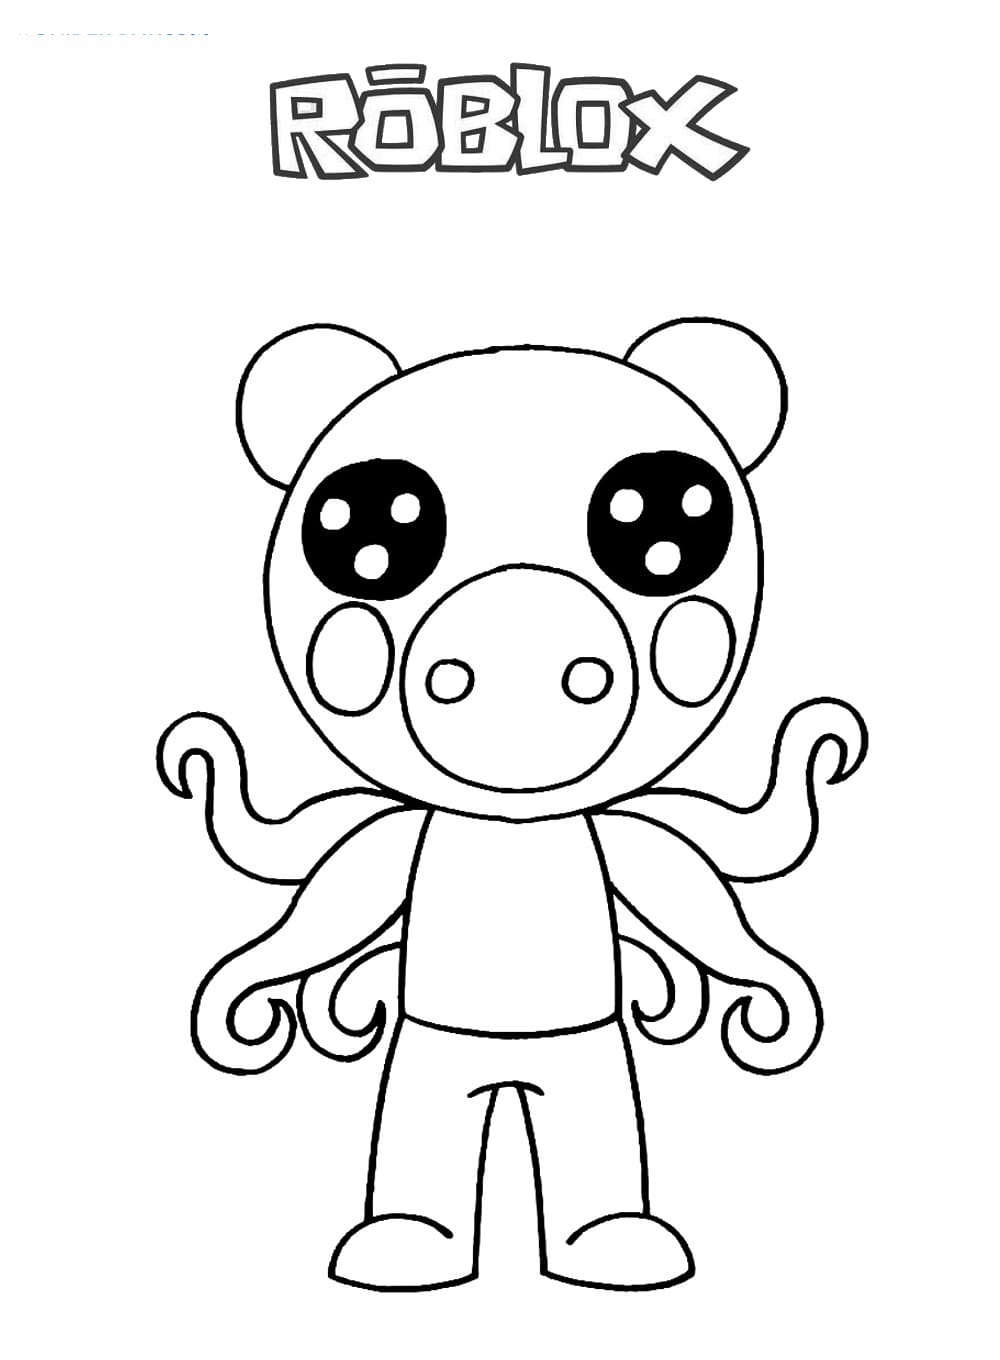 Printable Piggy Coloring Pages Pdf - Parasee Piggy Coloring Pages